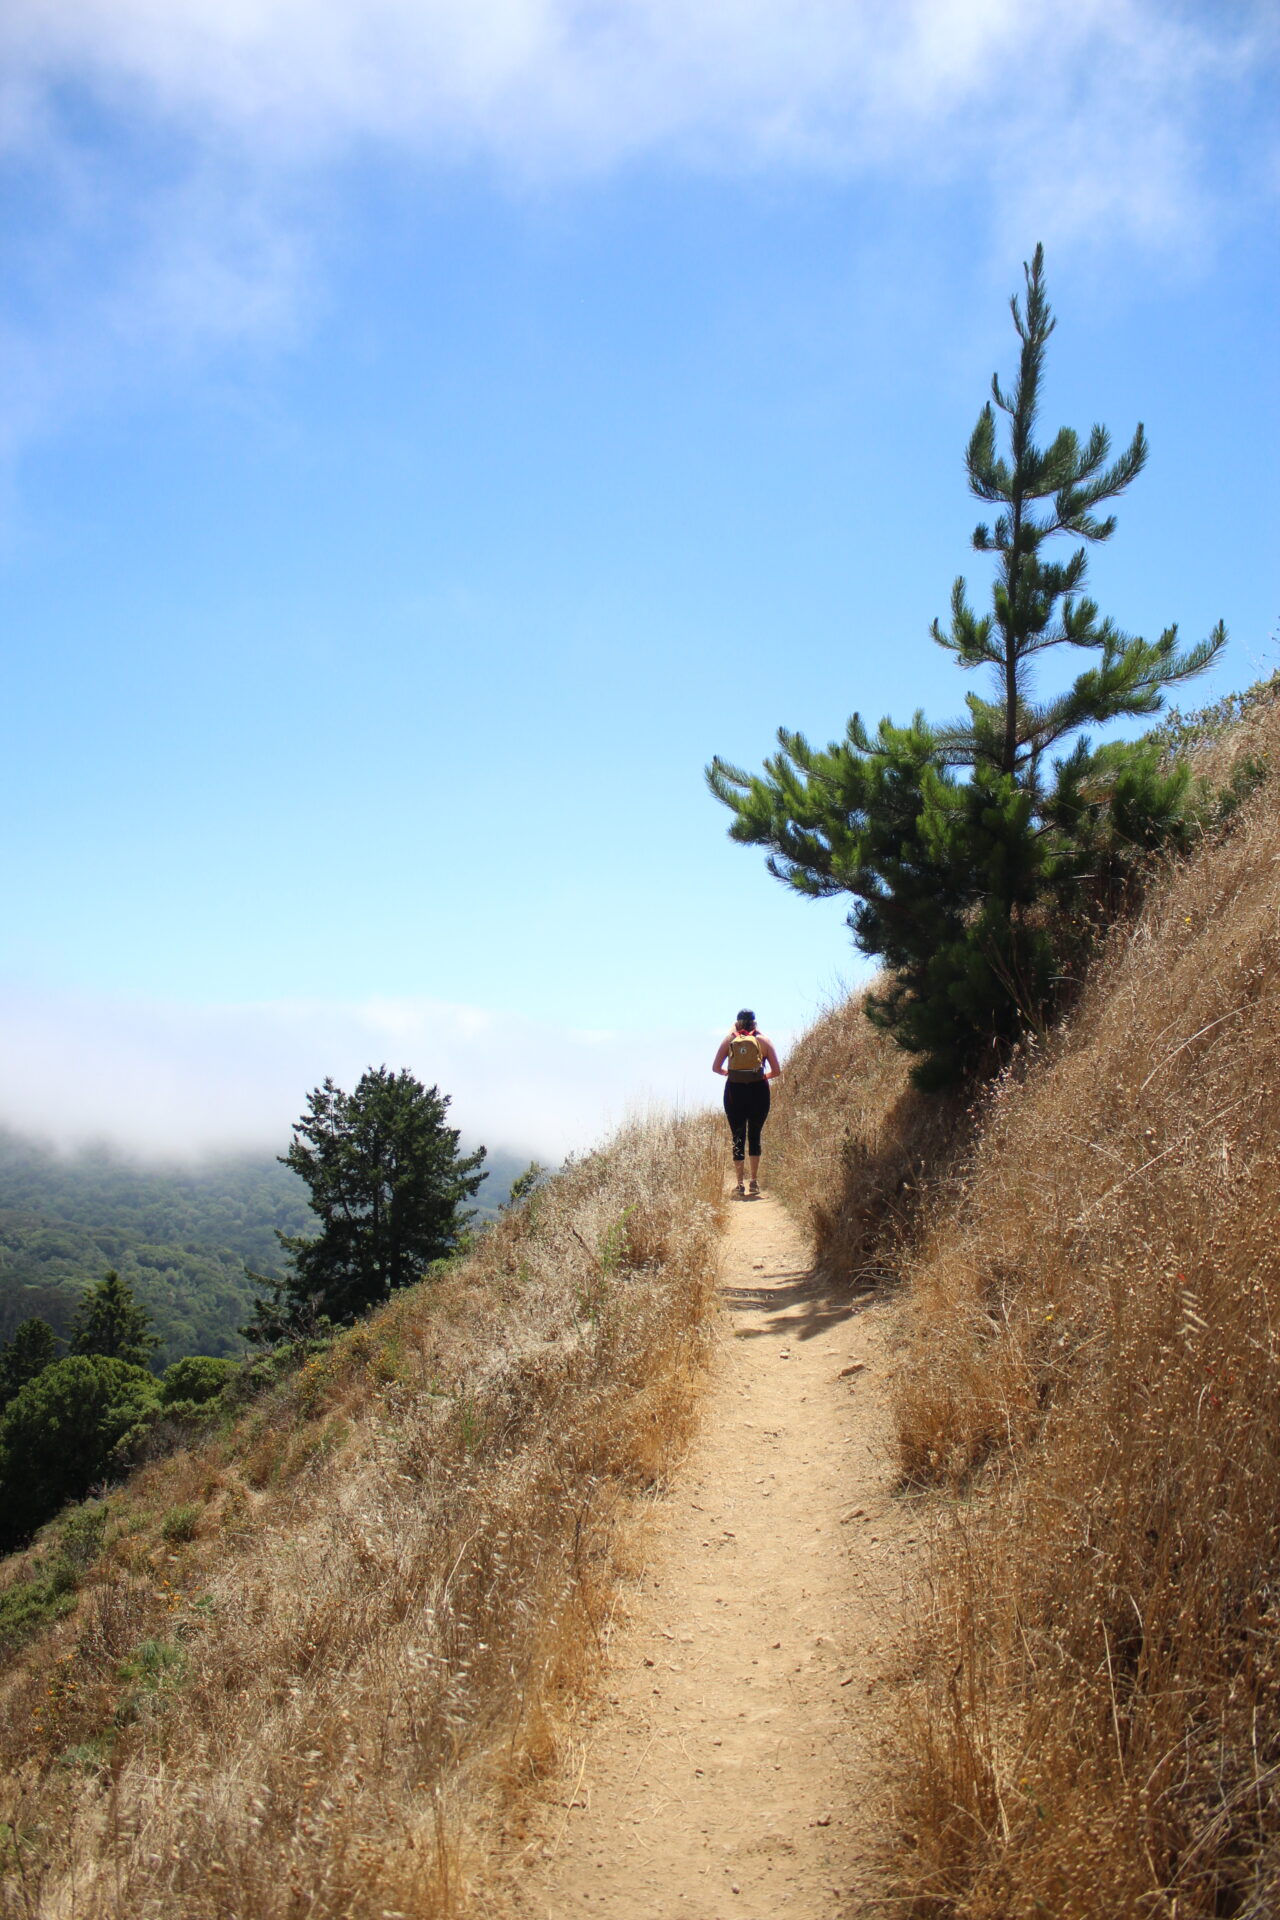 Muir woods trail with blue sky and woman walking ahead